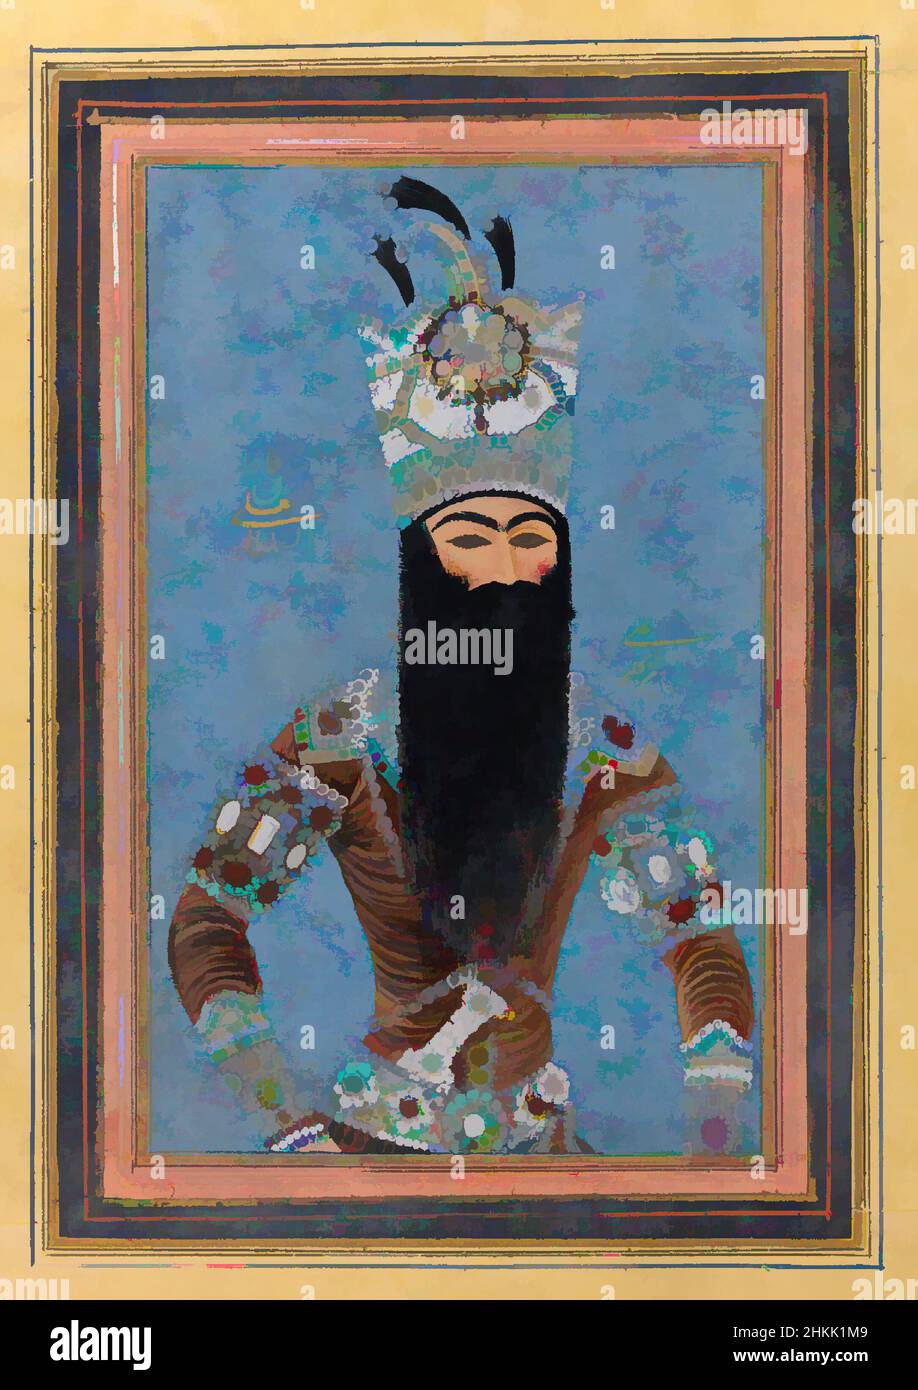 Art inspired by Portrait of Fath 'Ali Shah Qajar, Mihr 'Ali, Iranian, active ca. 1800-1830, Ink, opaque watercolor, and gold on paper, Iran, 1815, Qajar, Qajar Period, 3 1/2 x 5 in., 8.9 x 12.7 cm, beard, blue, iran, king, long beard, monarch, persia, persian, qajar, shah, Classic works modernized by Artotop with a splash of modernity. Shapes, color and value, eye-catching visual impact on art. Emotions through freedom of artworks in a contemporary way. A timeless message pursuing a wildly creative new direction. Artists turning to the digital medium and creating the Artotop NFT Stock Photo